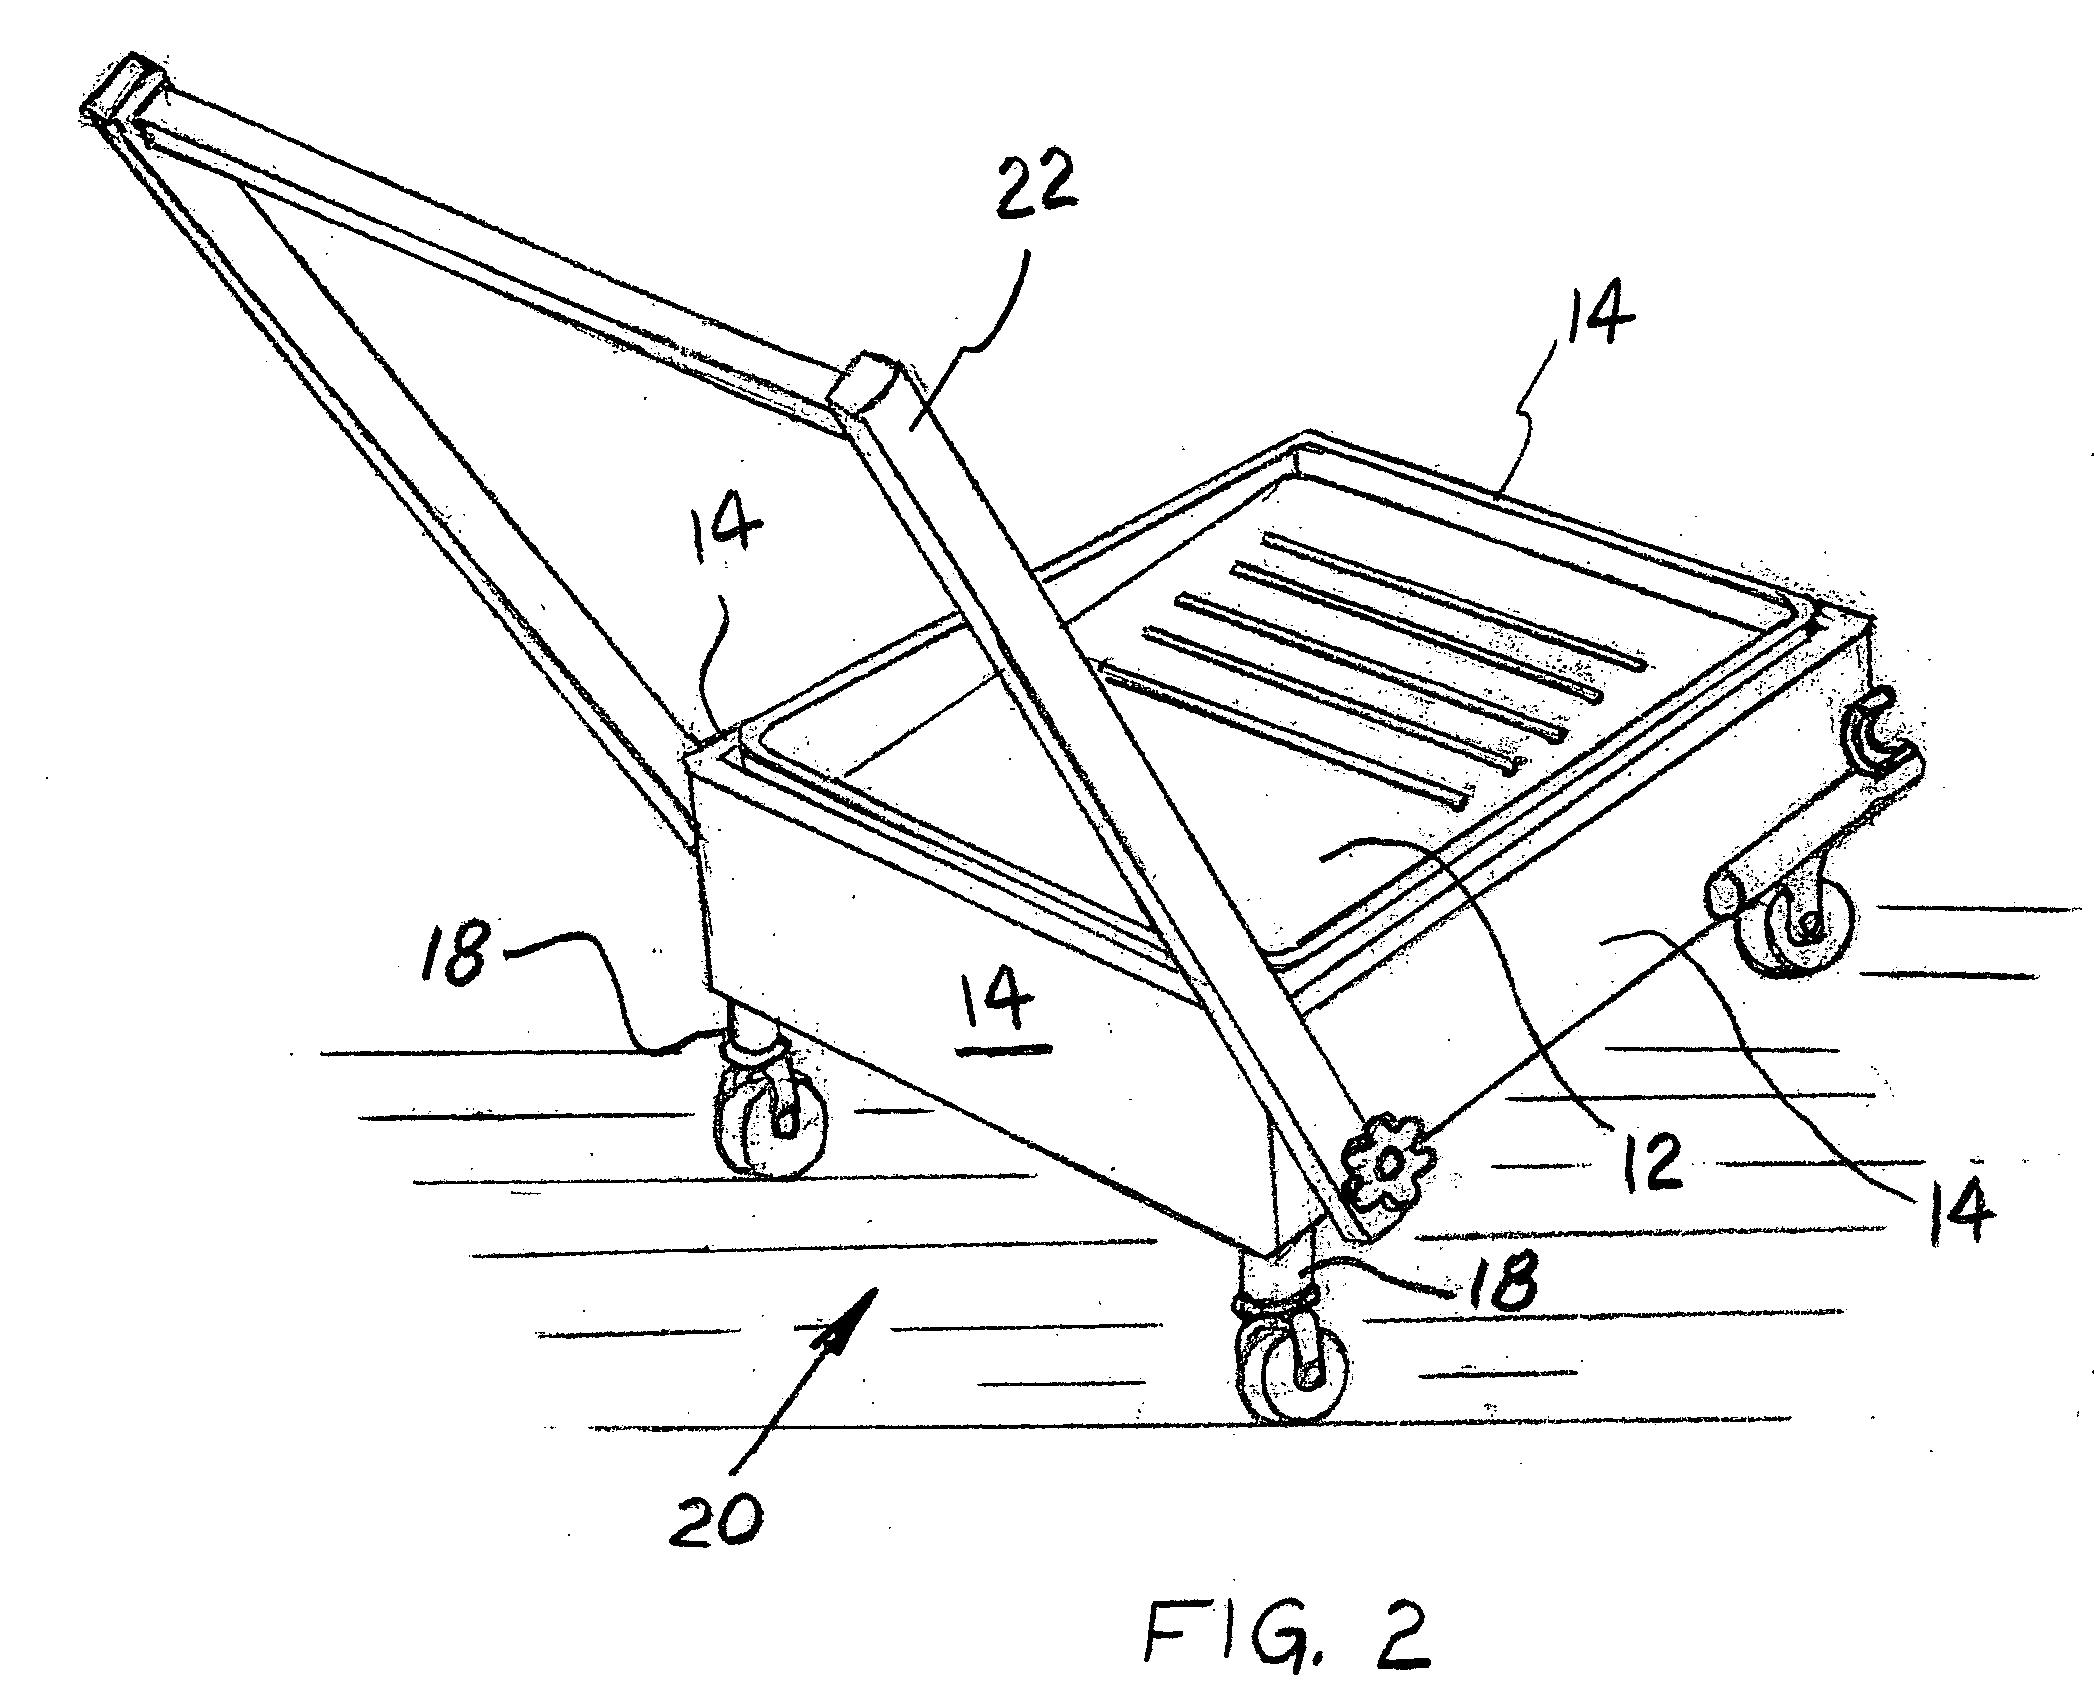 Apparatus for holding a paint tray